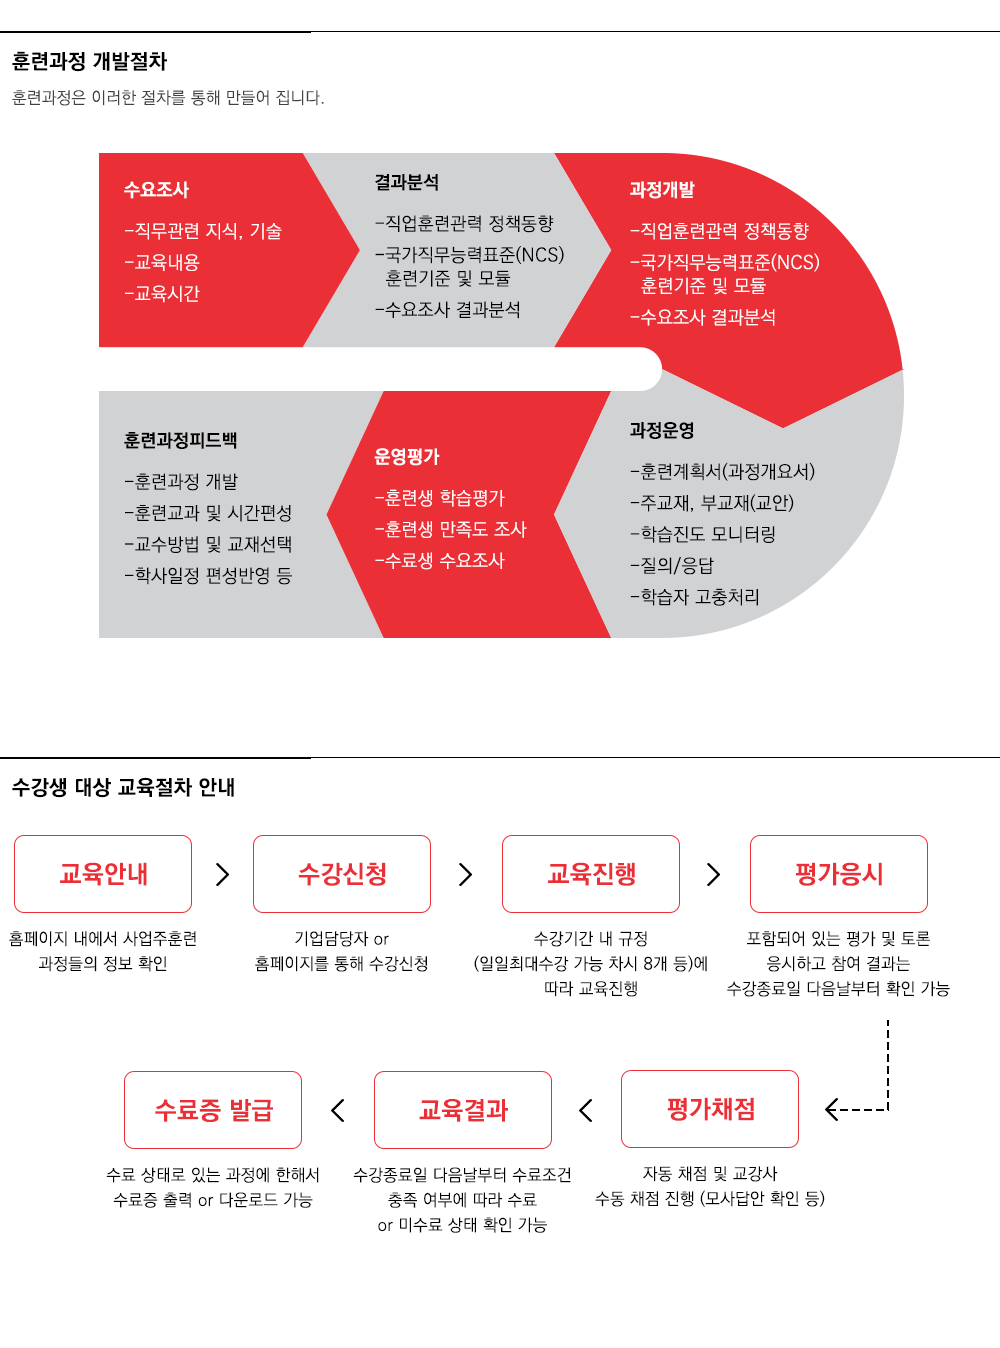 About 엘캠퍼스